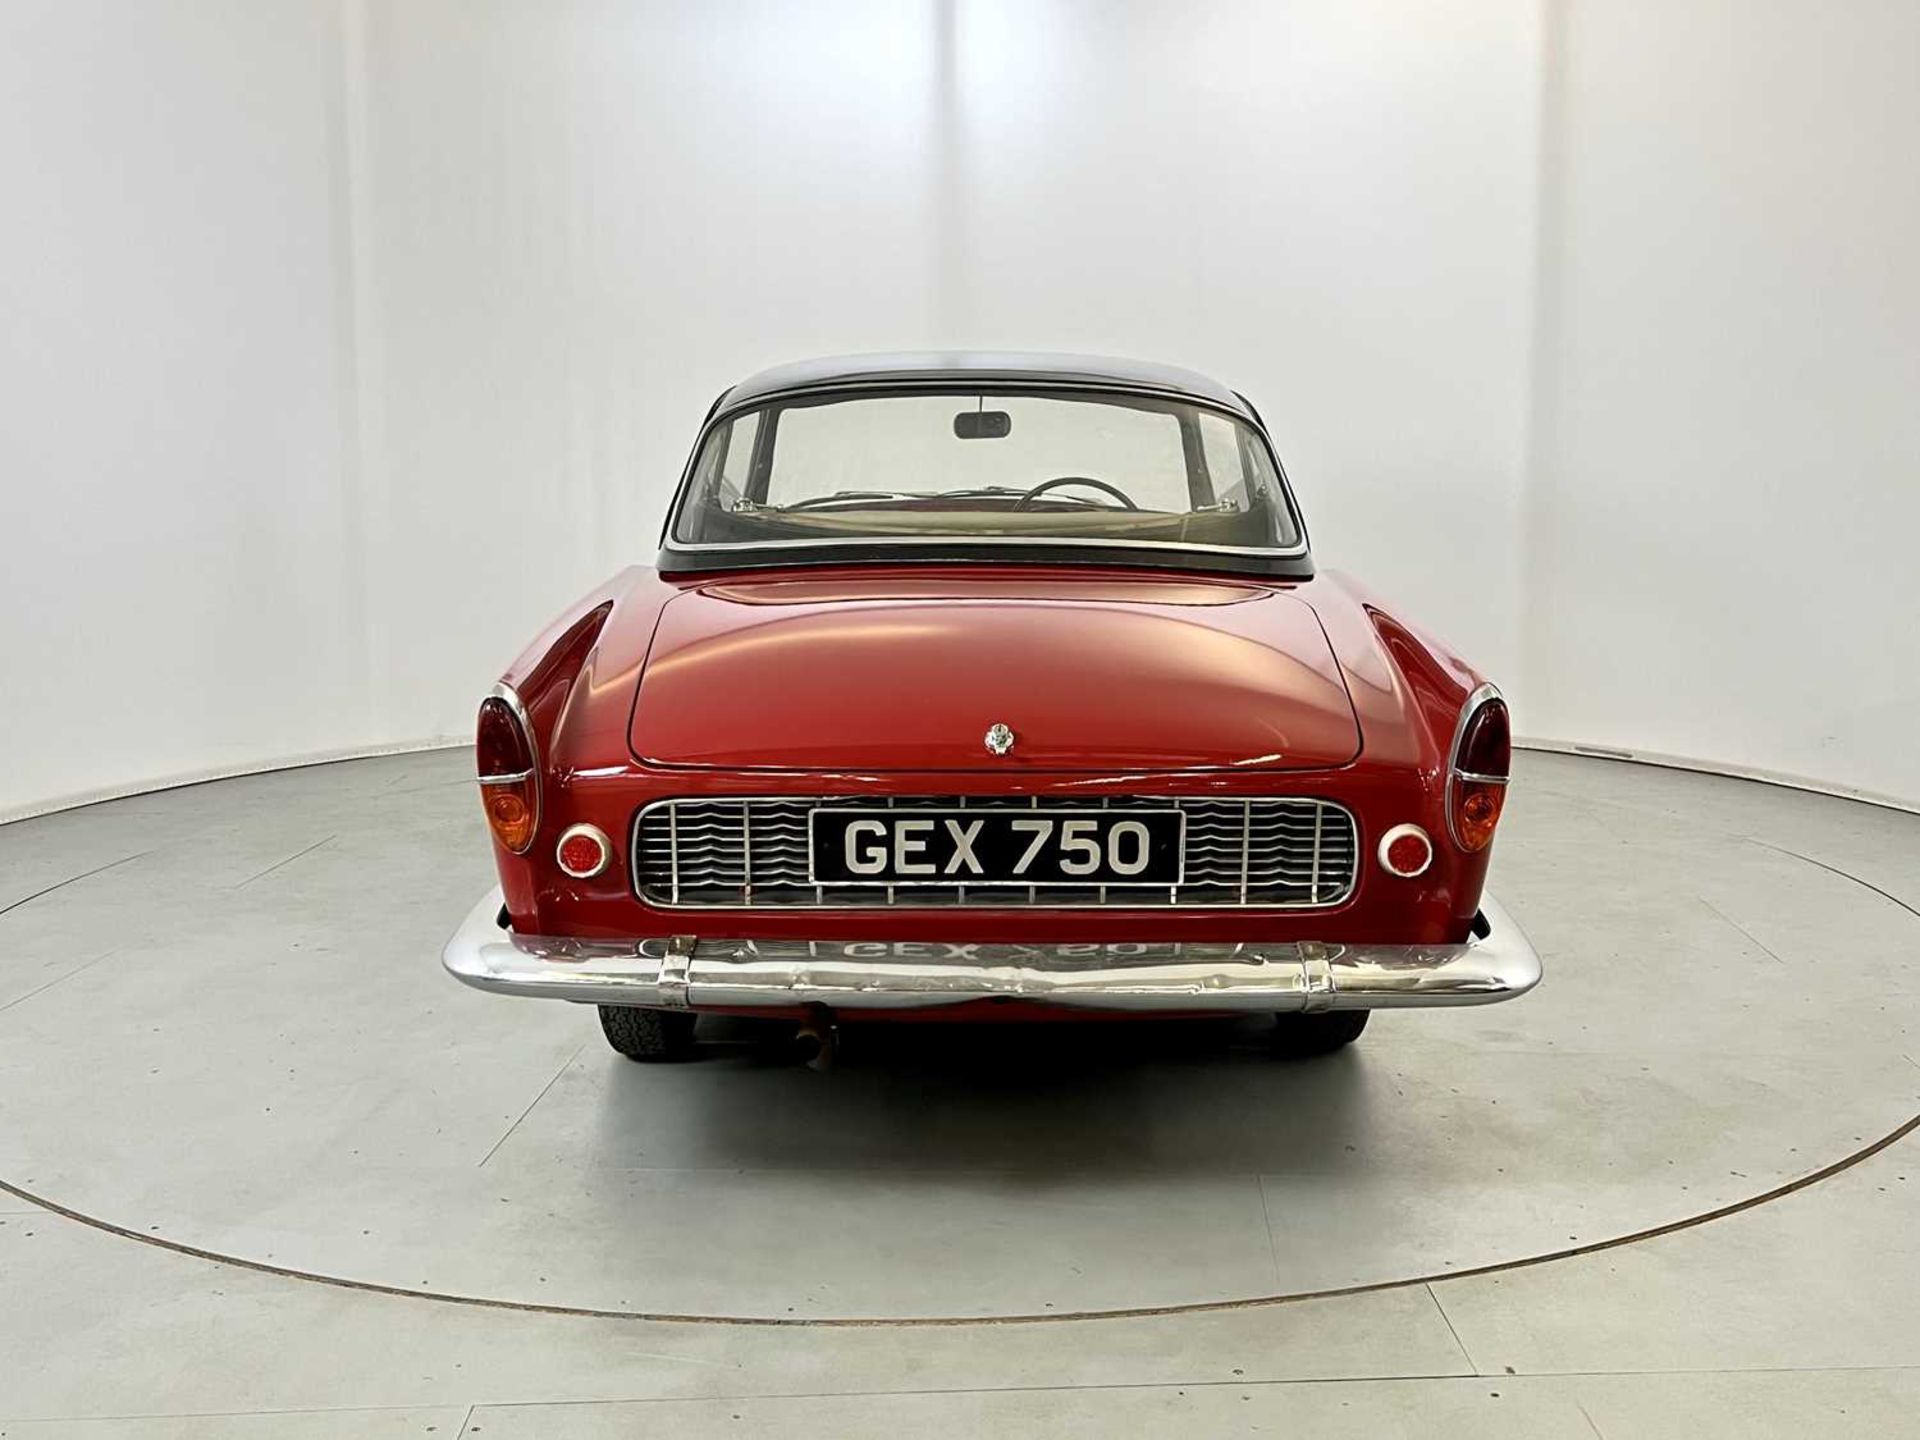 1962 Renault Floride Convertible - Image 8 of 43